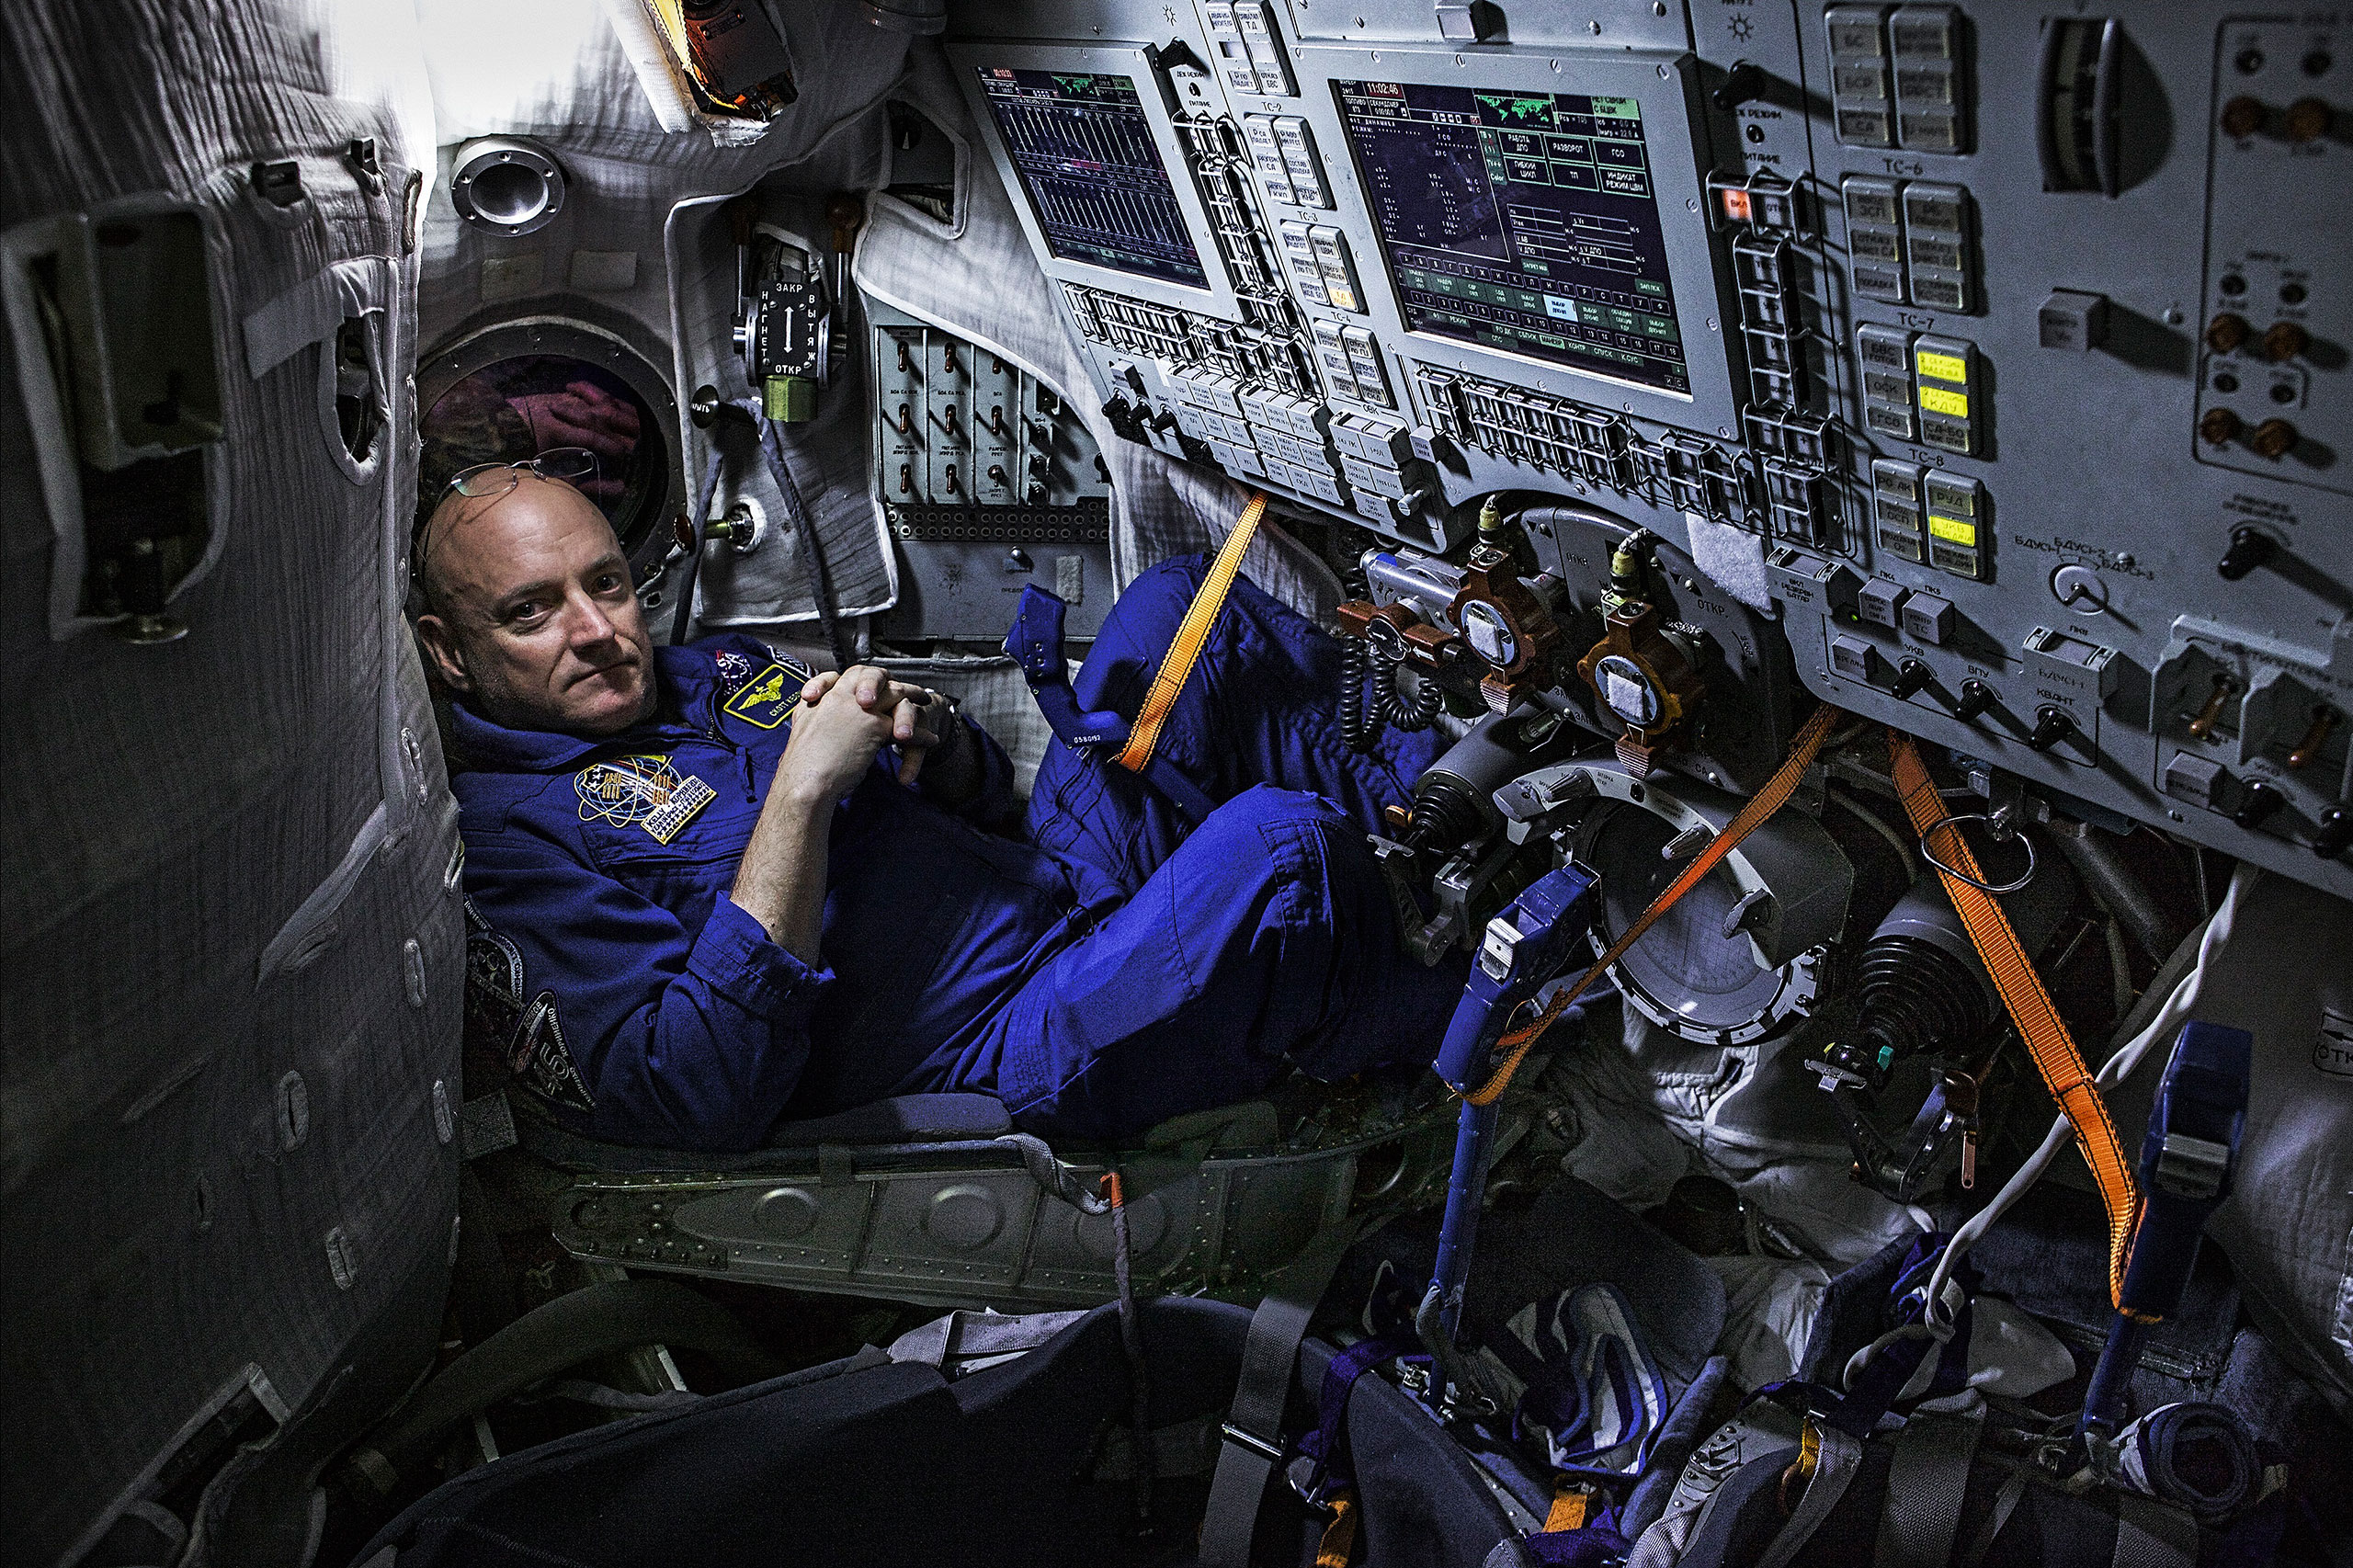 NASA astronaut Scott Kelly sits in a training simulator in Star City, Russia, March 4, 2015.From  The 100 Most Influential People.  April 27 / May 4, 2015 issue.